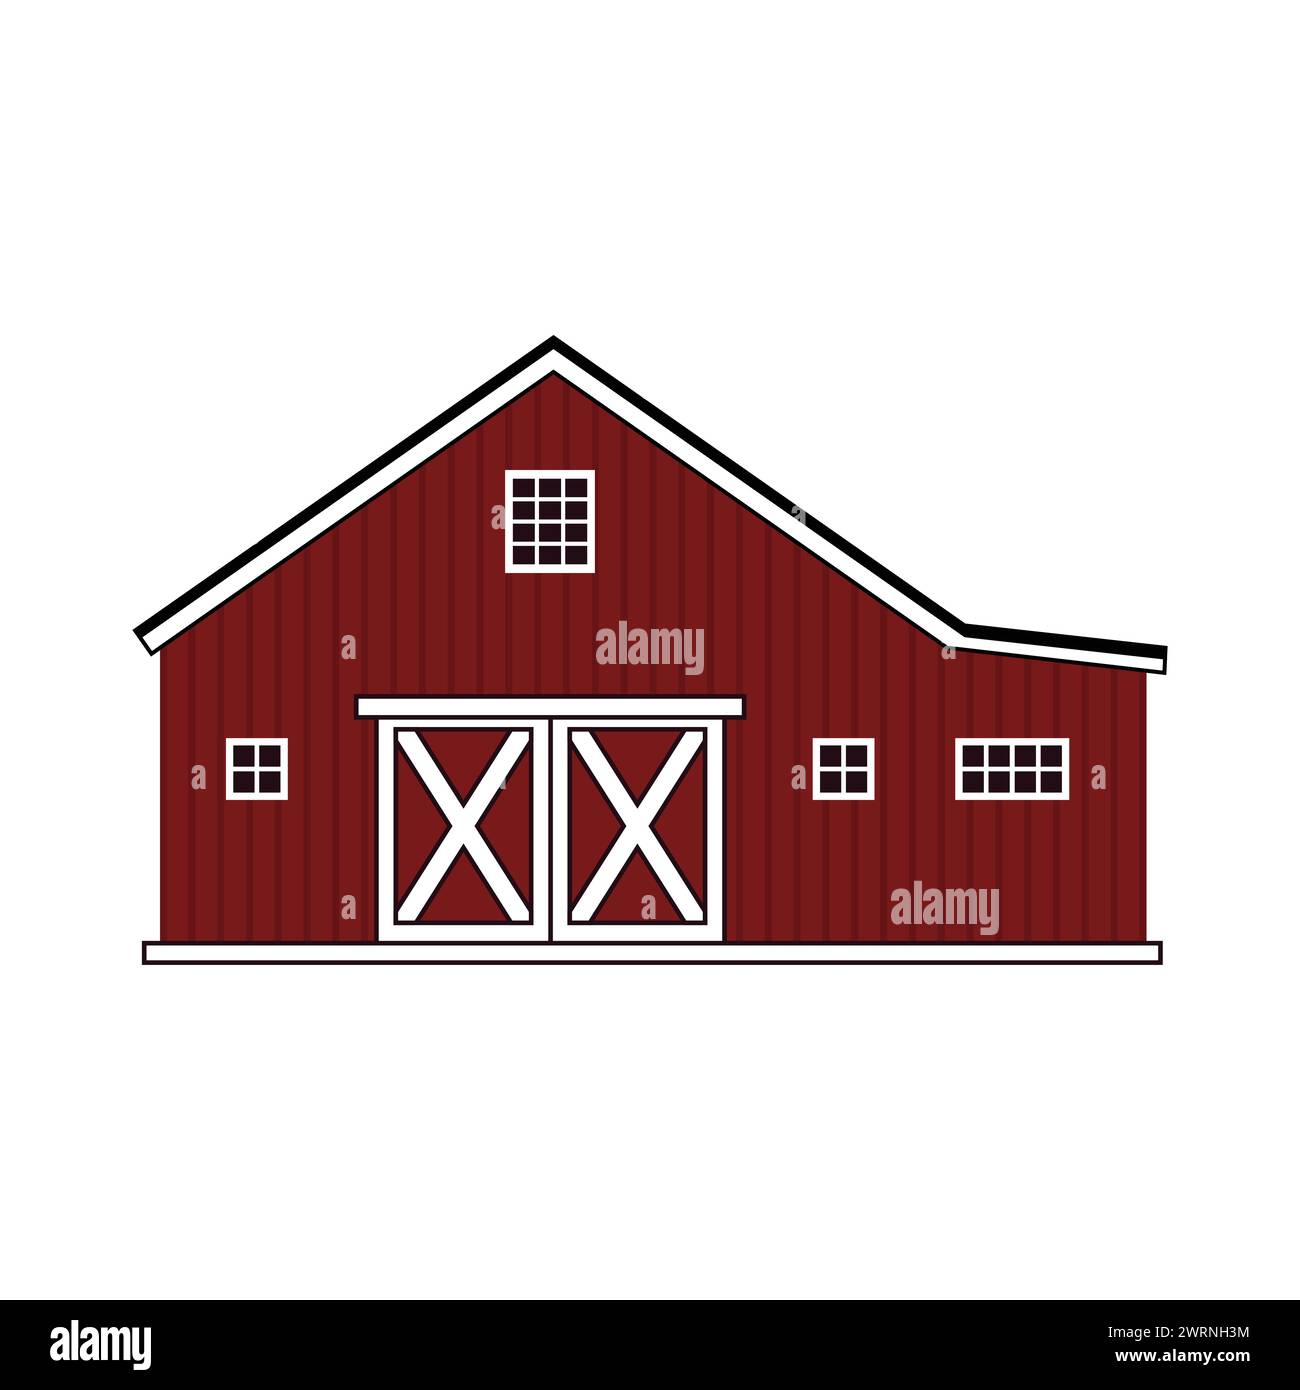 Red wooden rural barn cartoon american building. Vector Outline isolated hand drawn illustration on white background, front view Stock Vector